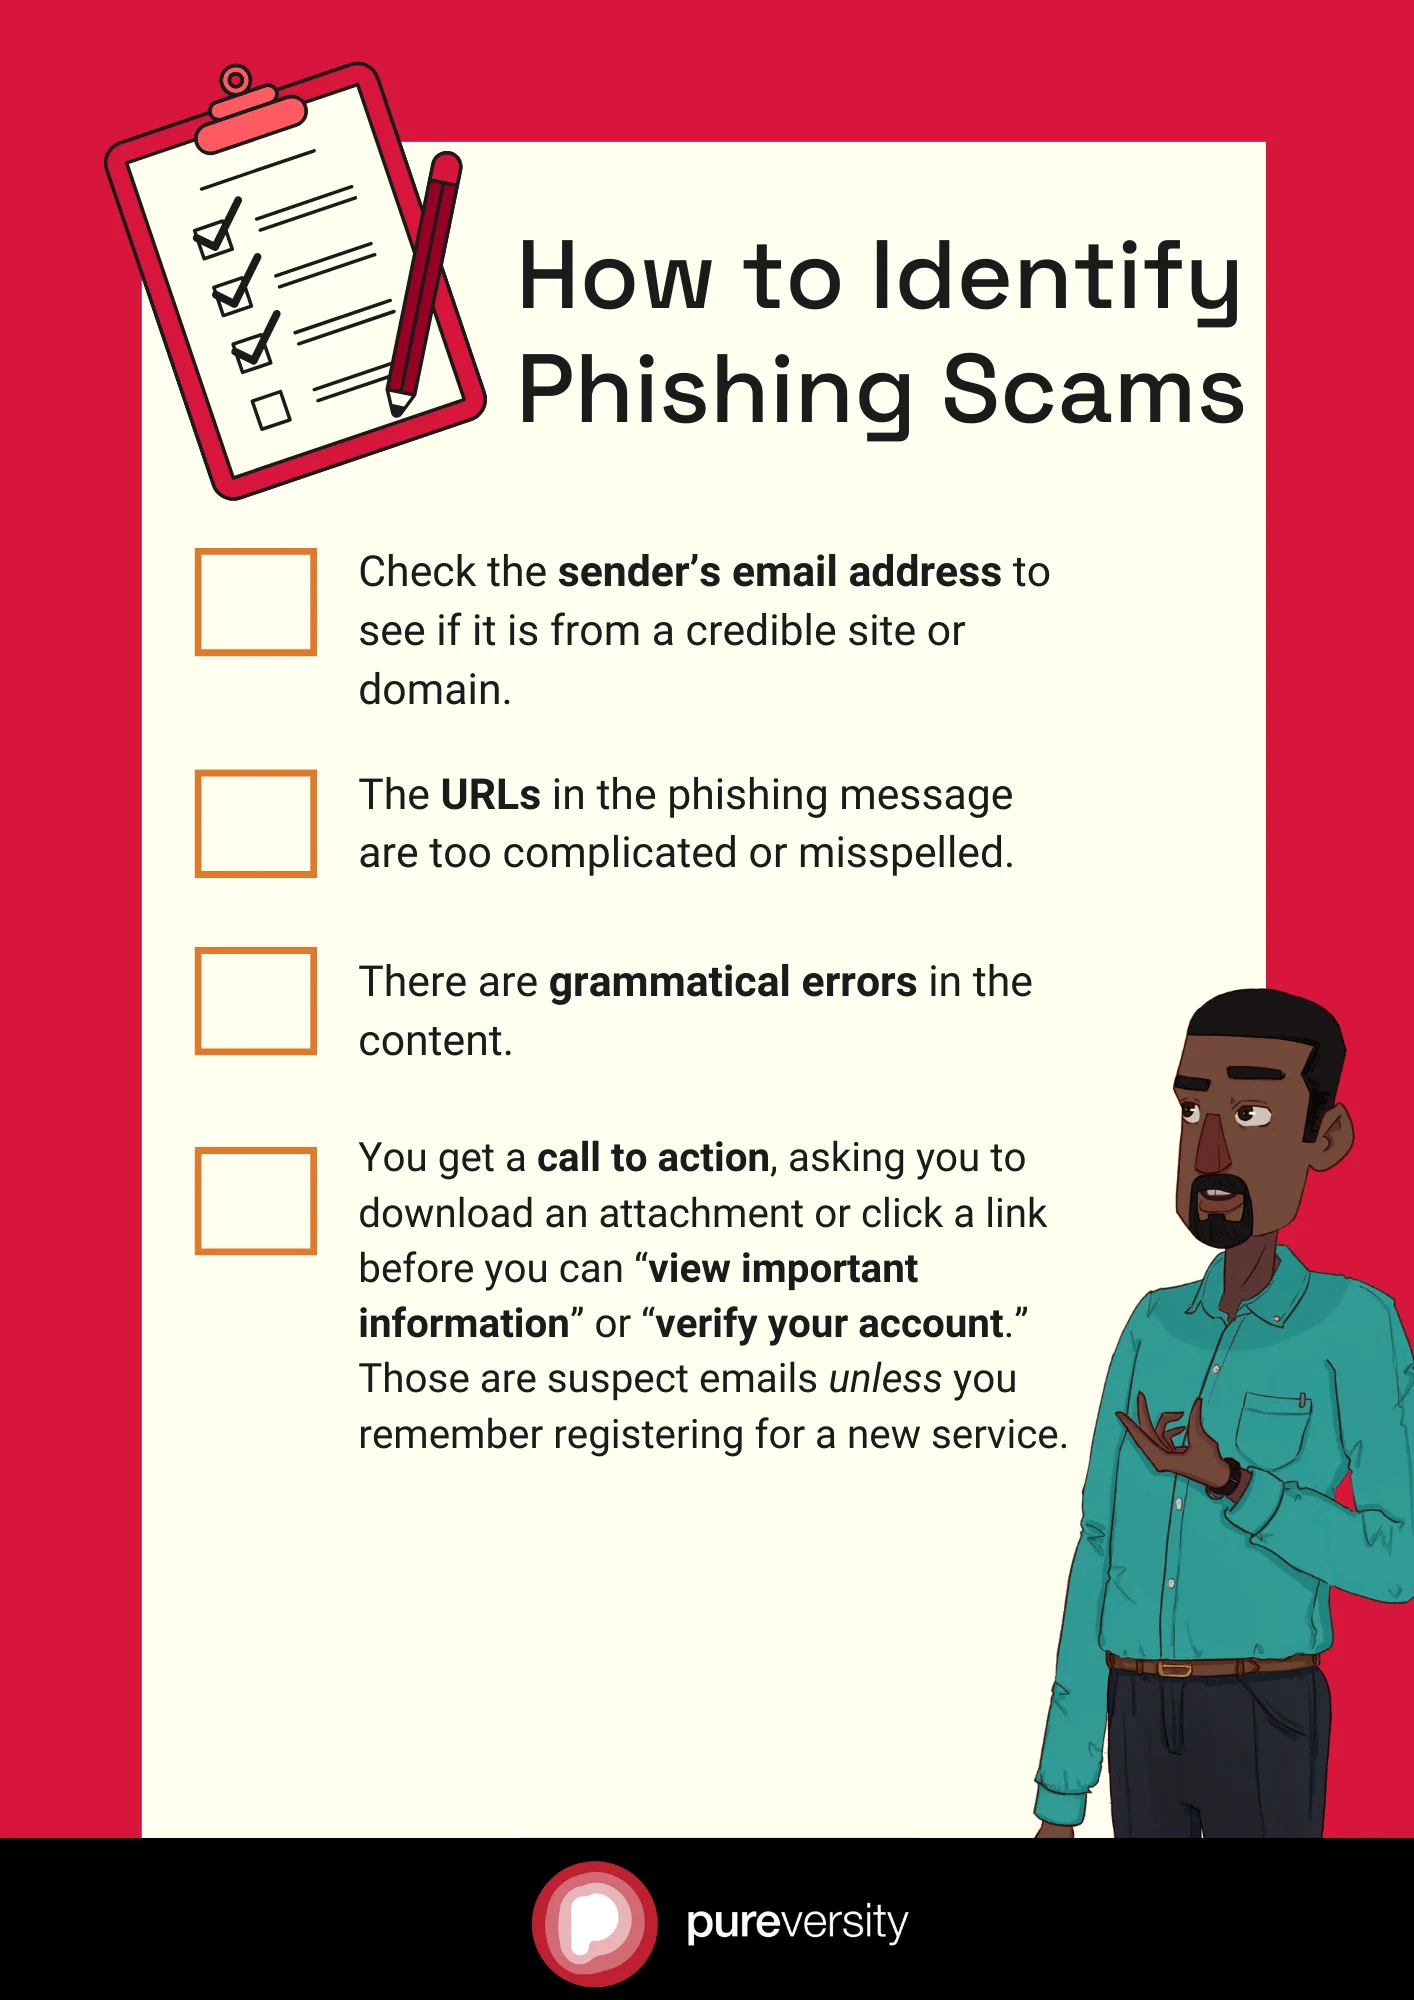 A checklist of things to identify phishing scam attempts